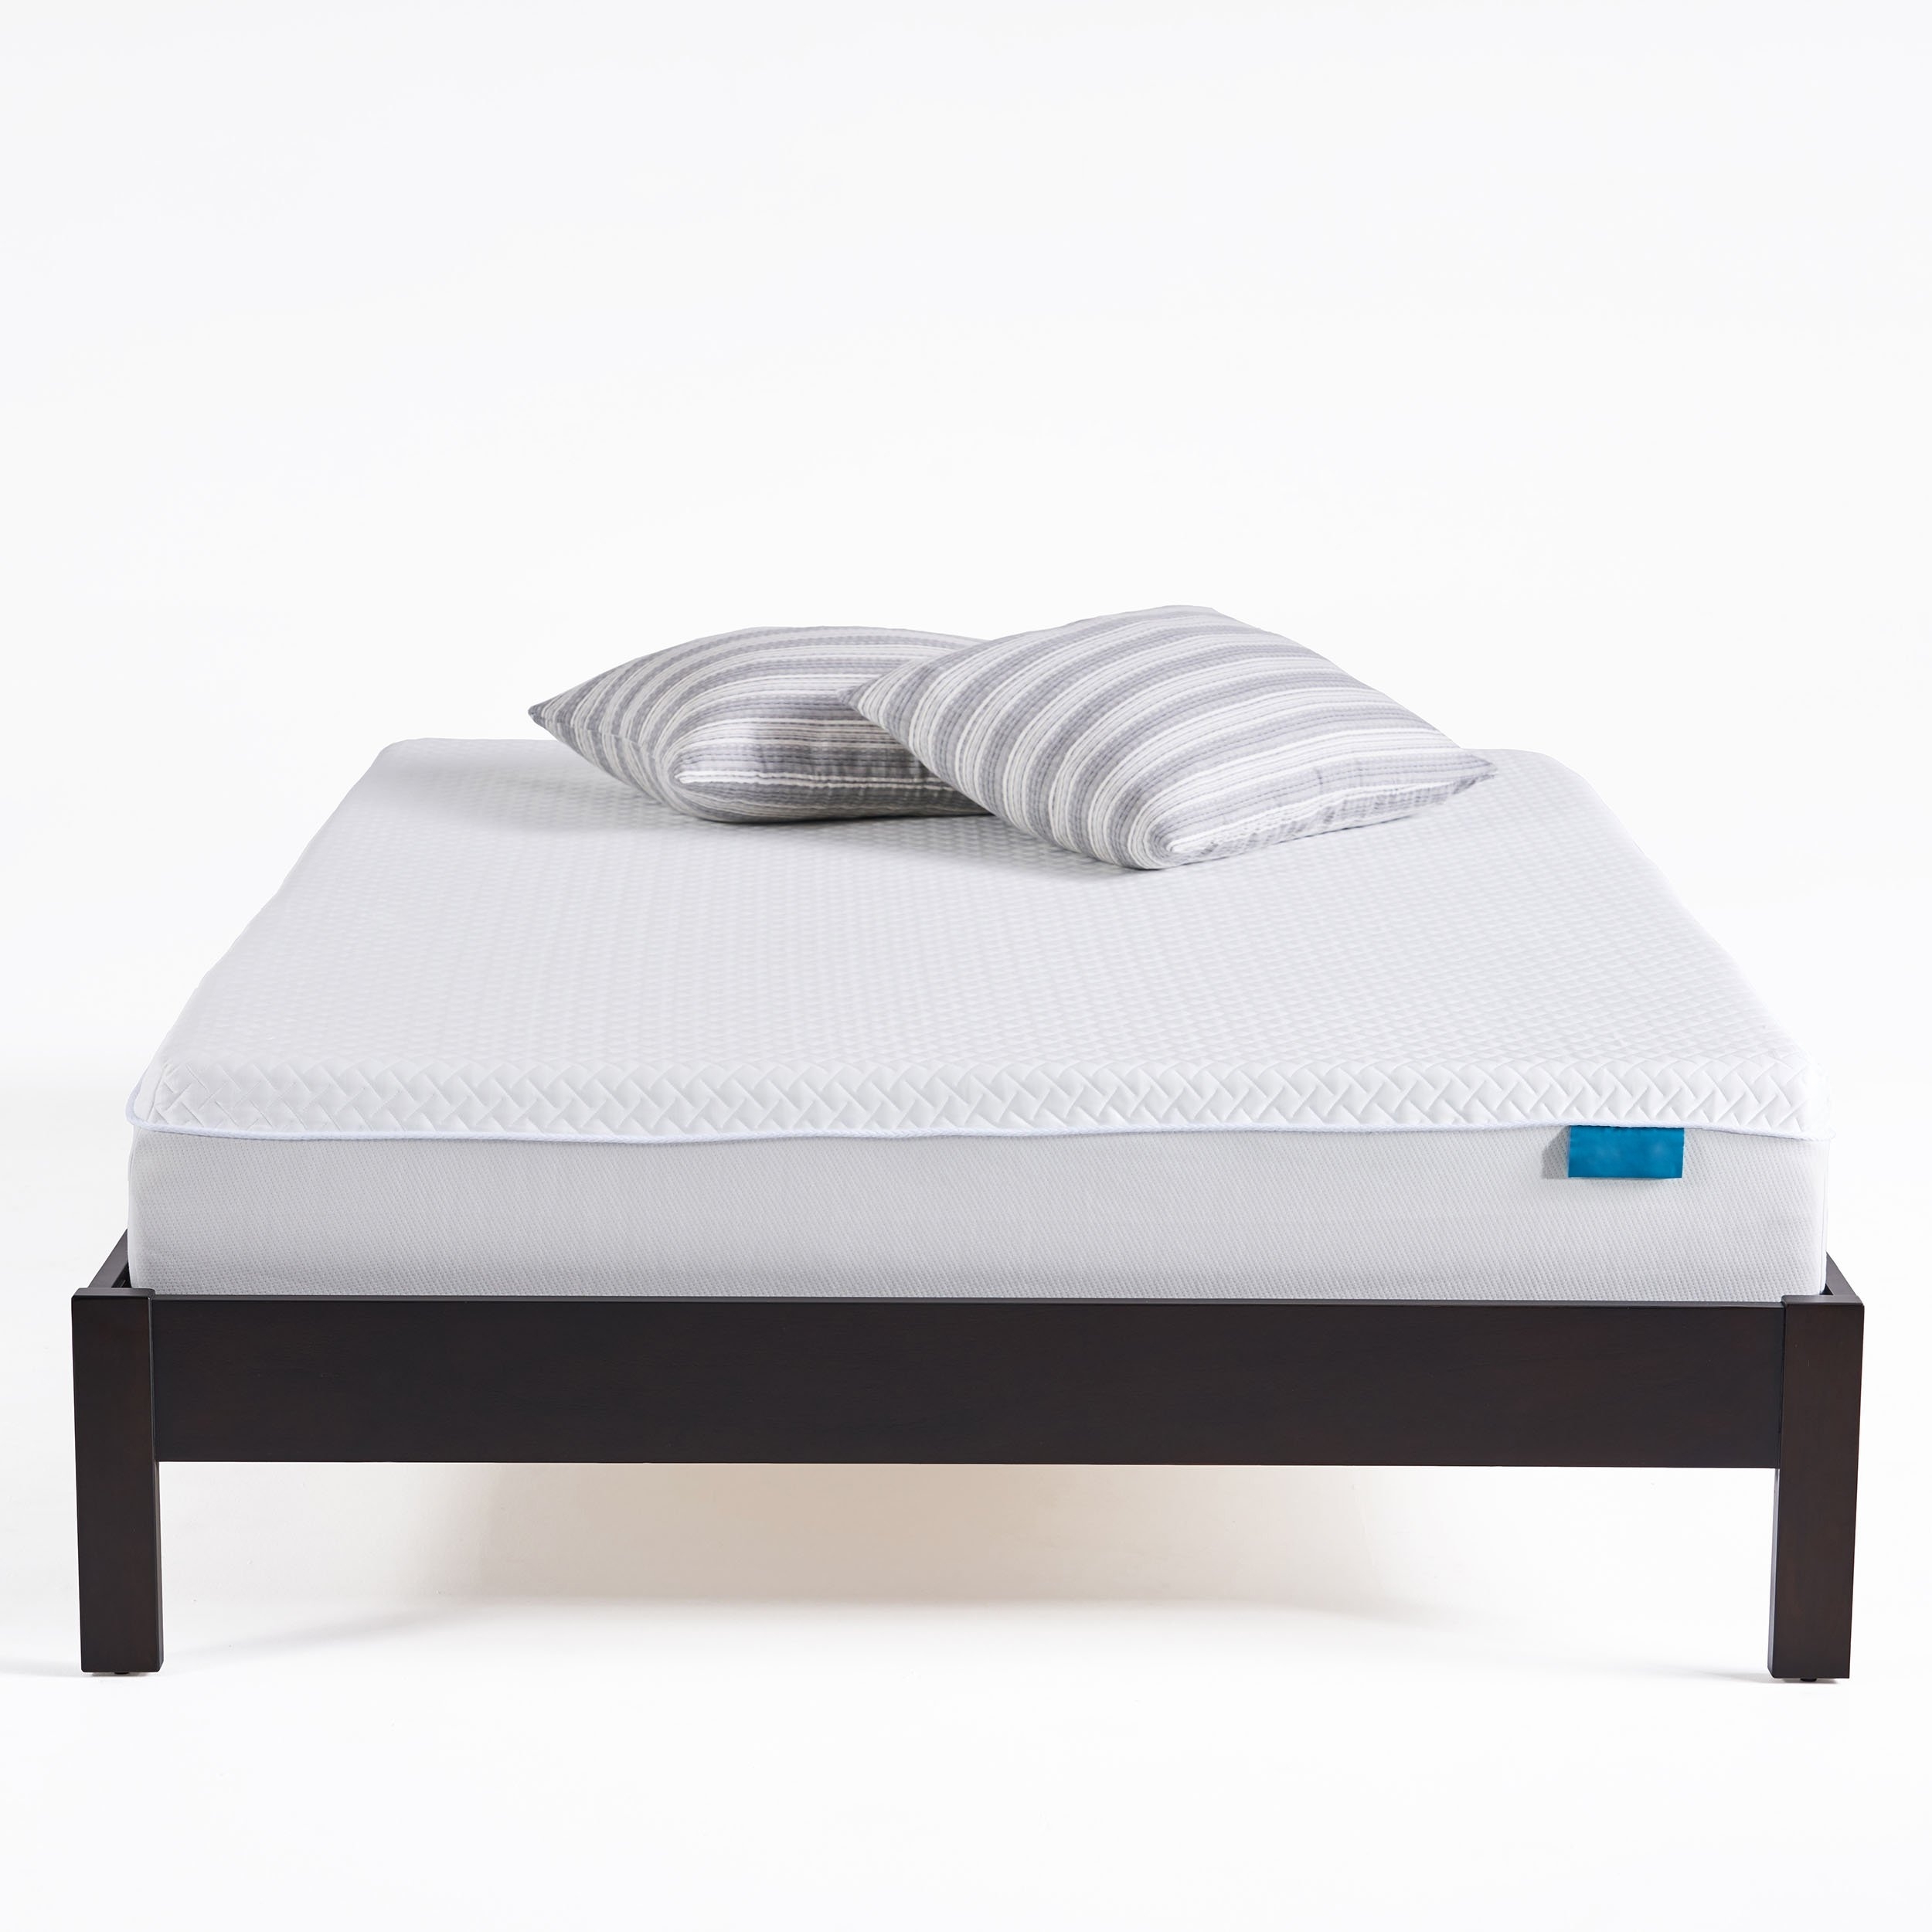 Barchetta 11" Hybrid Medium Firm Cool to Touch Mattress, White and Gray - twin